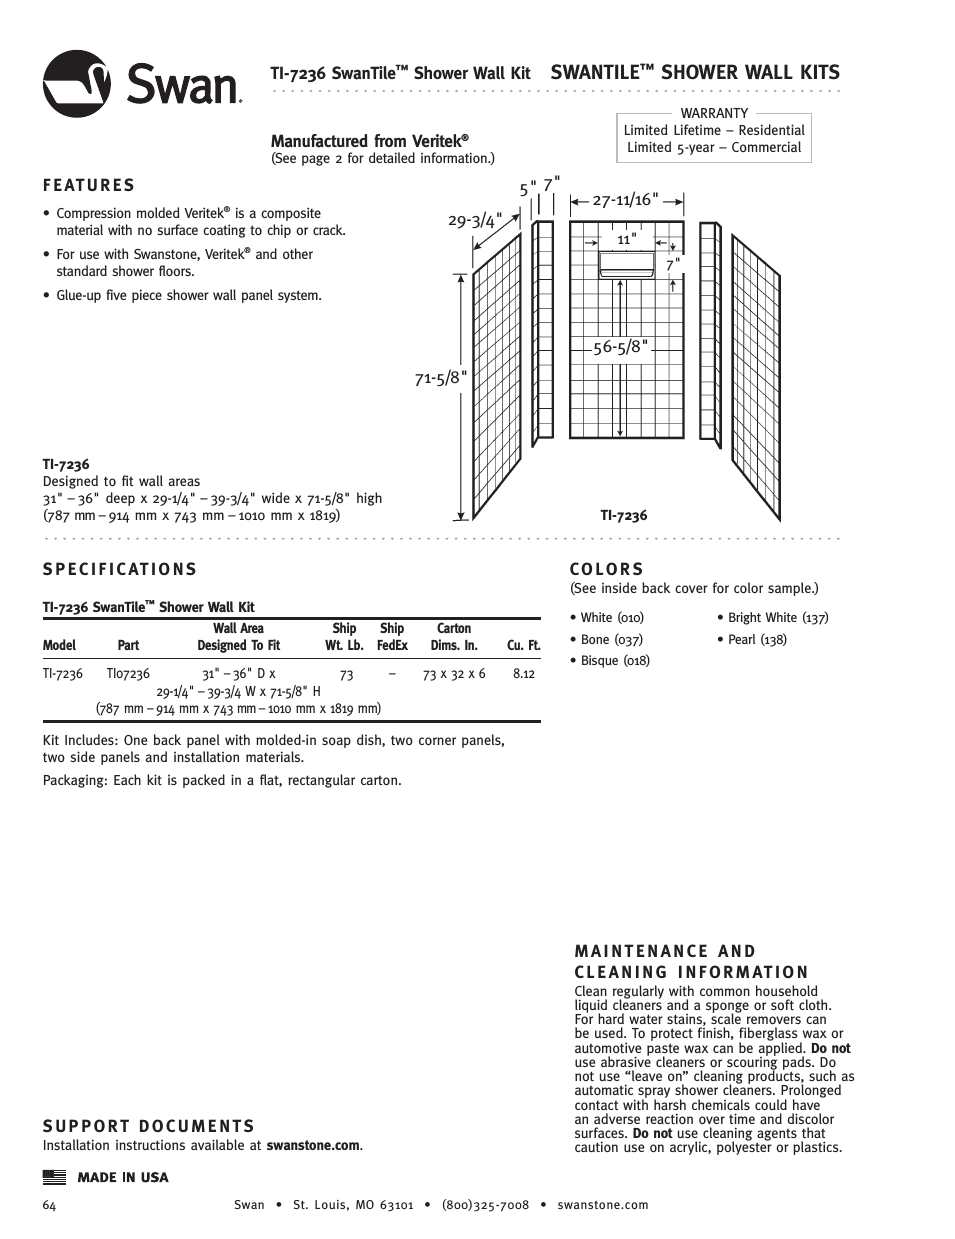 TI-7236 - Specification